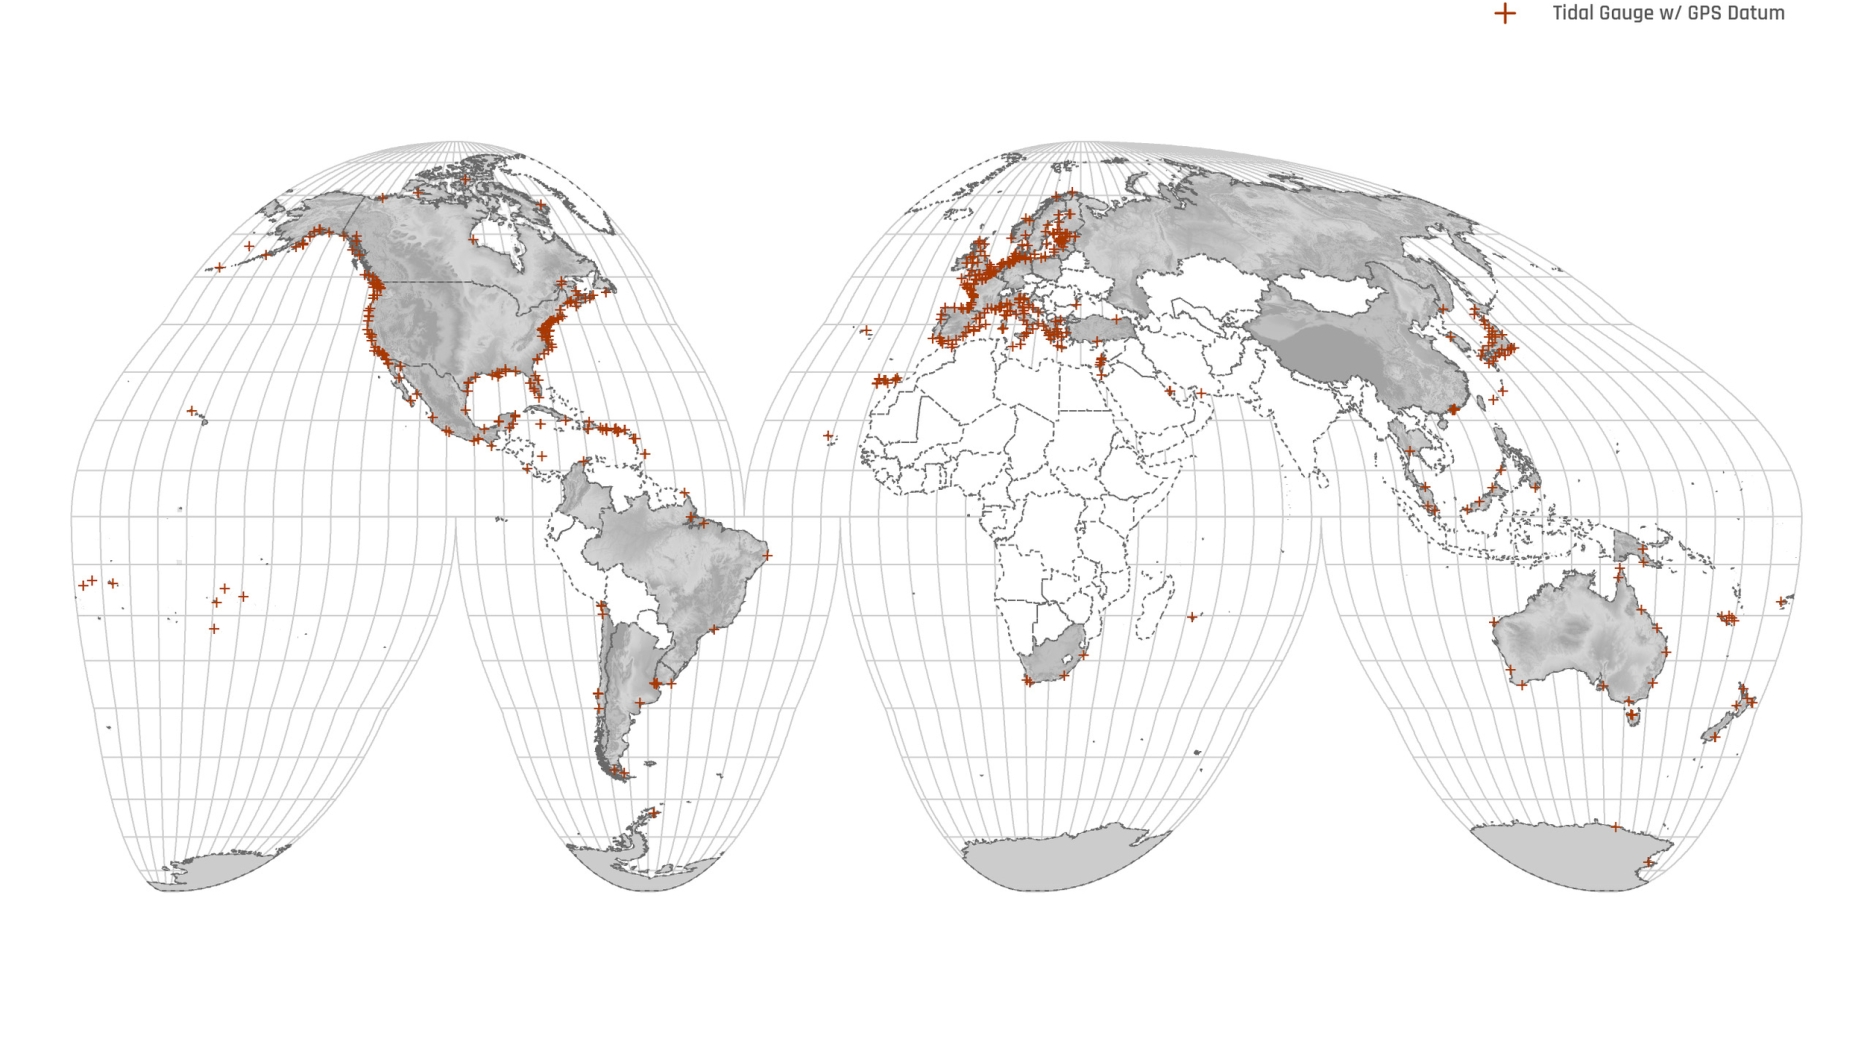 Map showing tidal gauges worldwide, most are groups in America, Europe, China and Japan